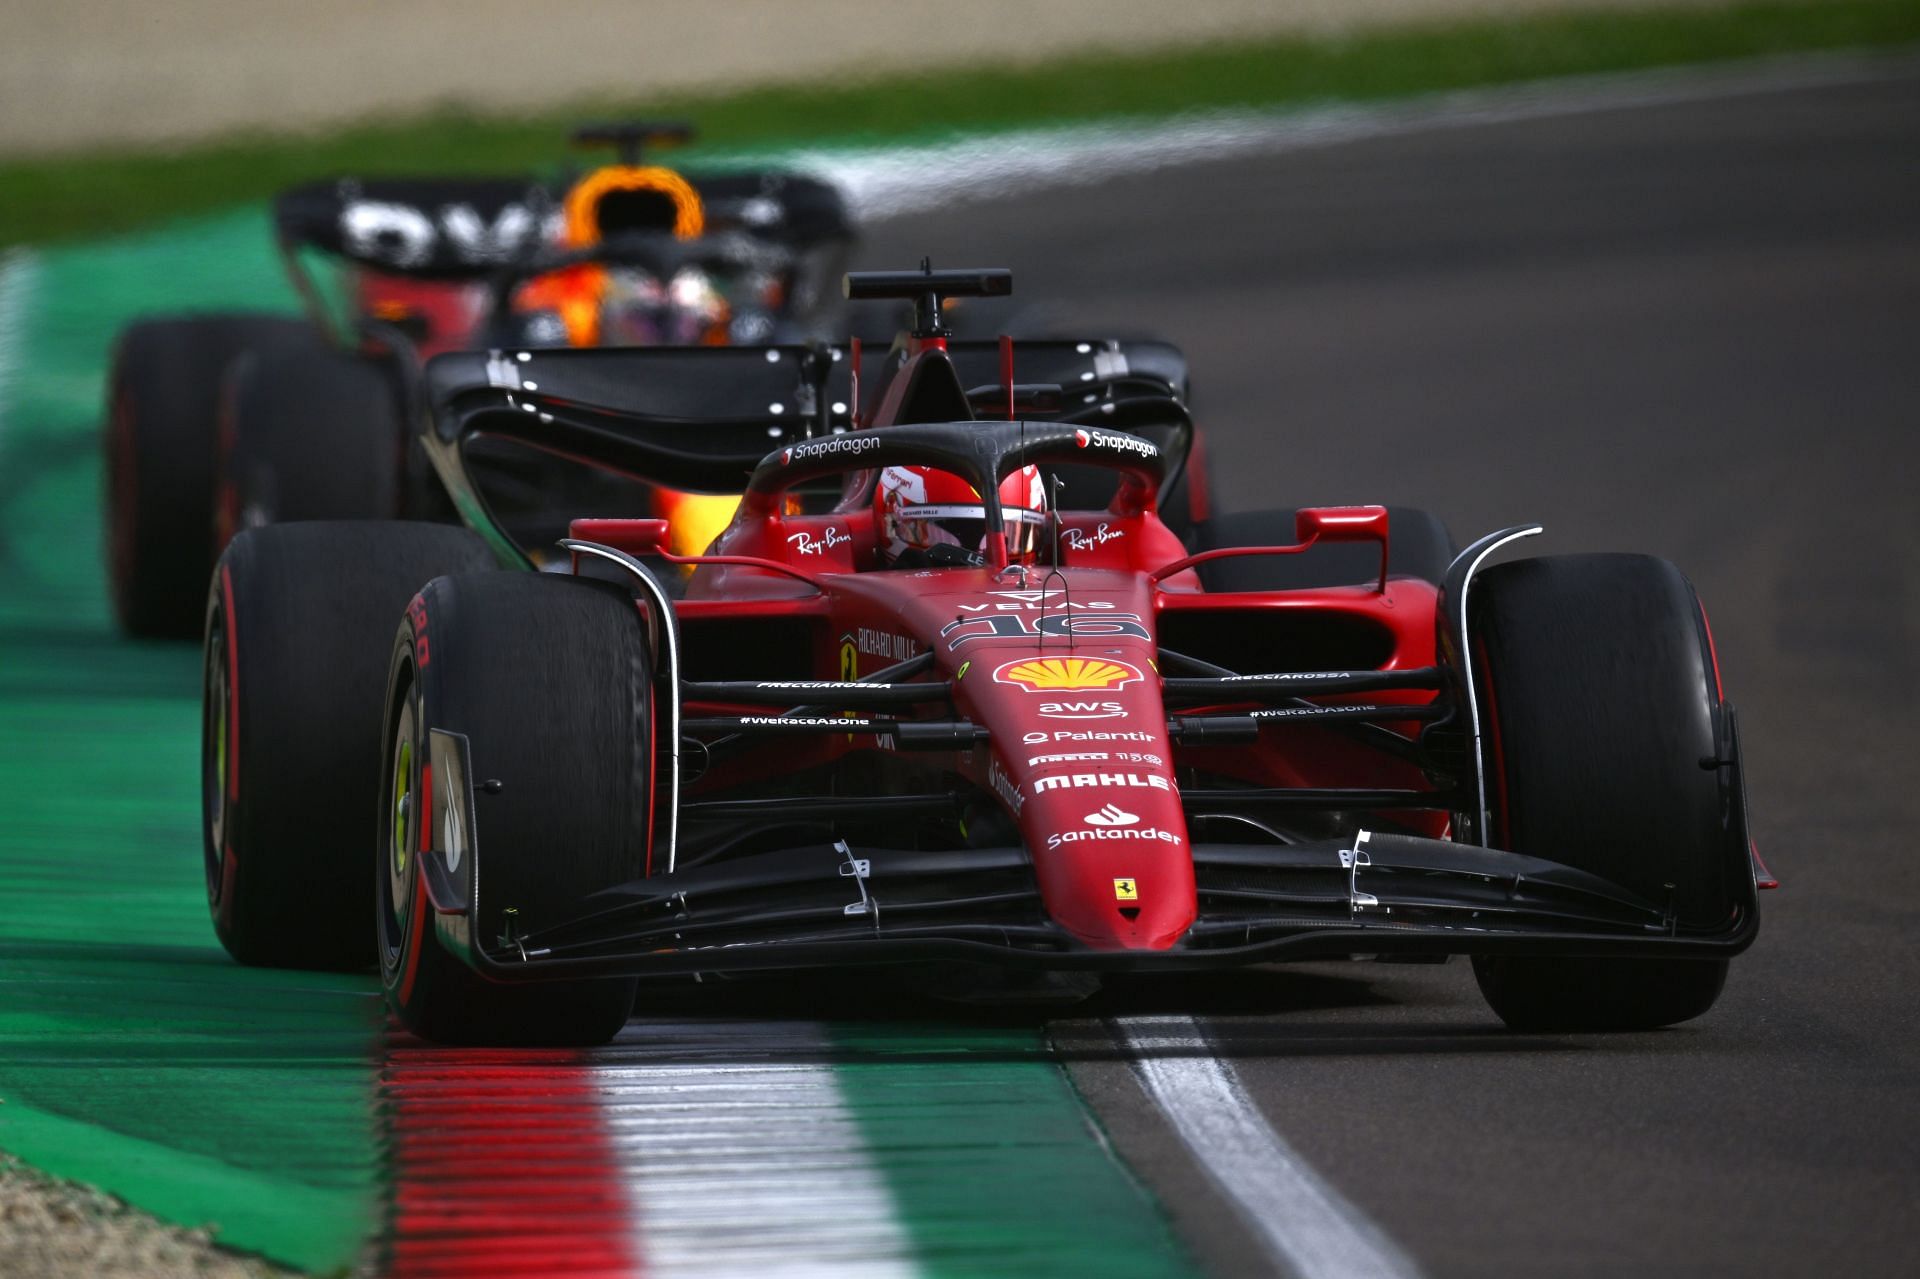 F1 News: Ferrari's tire degradation worries could be significant ...